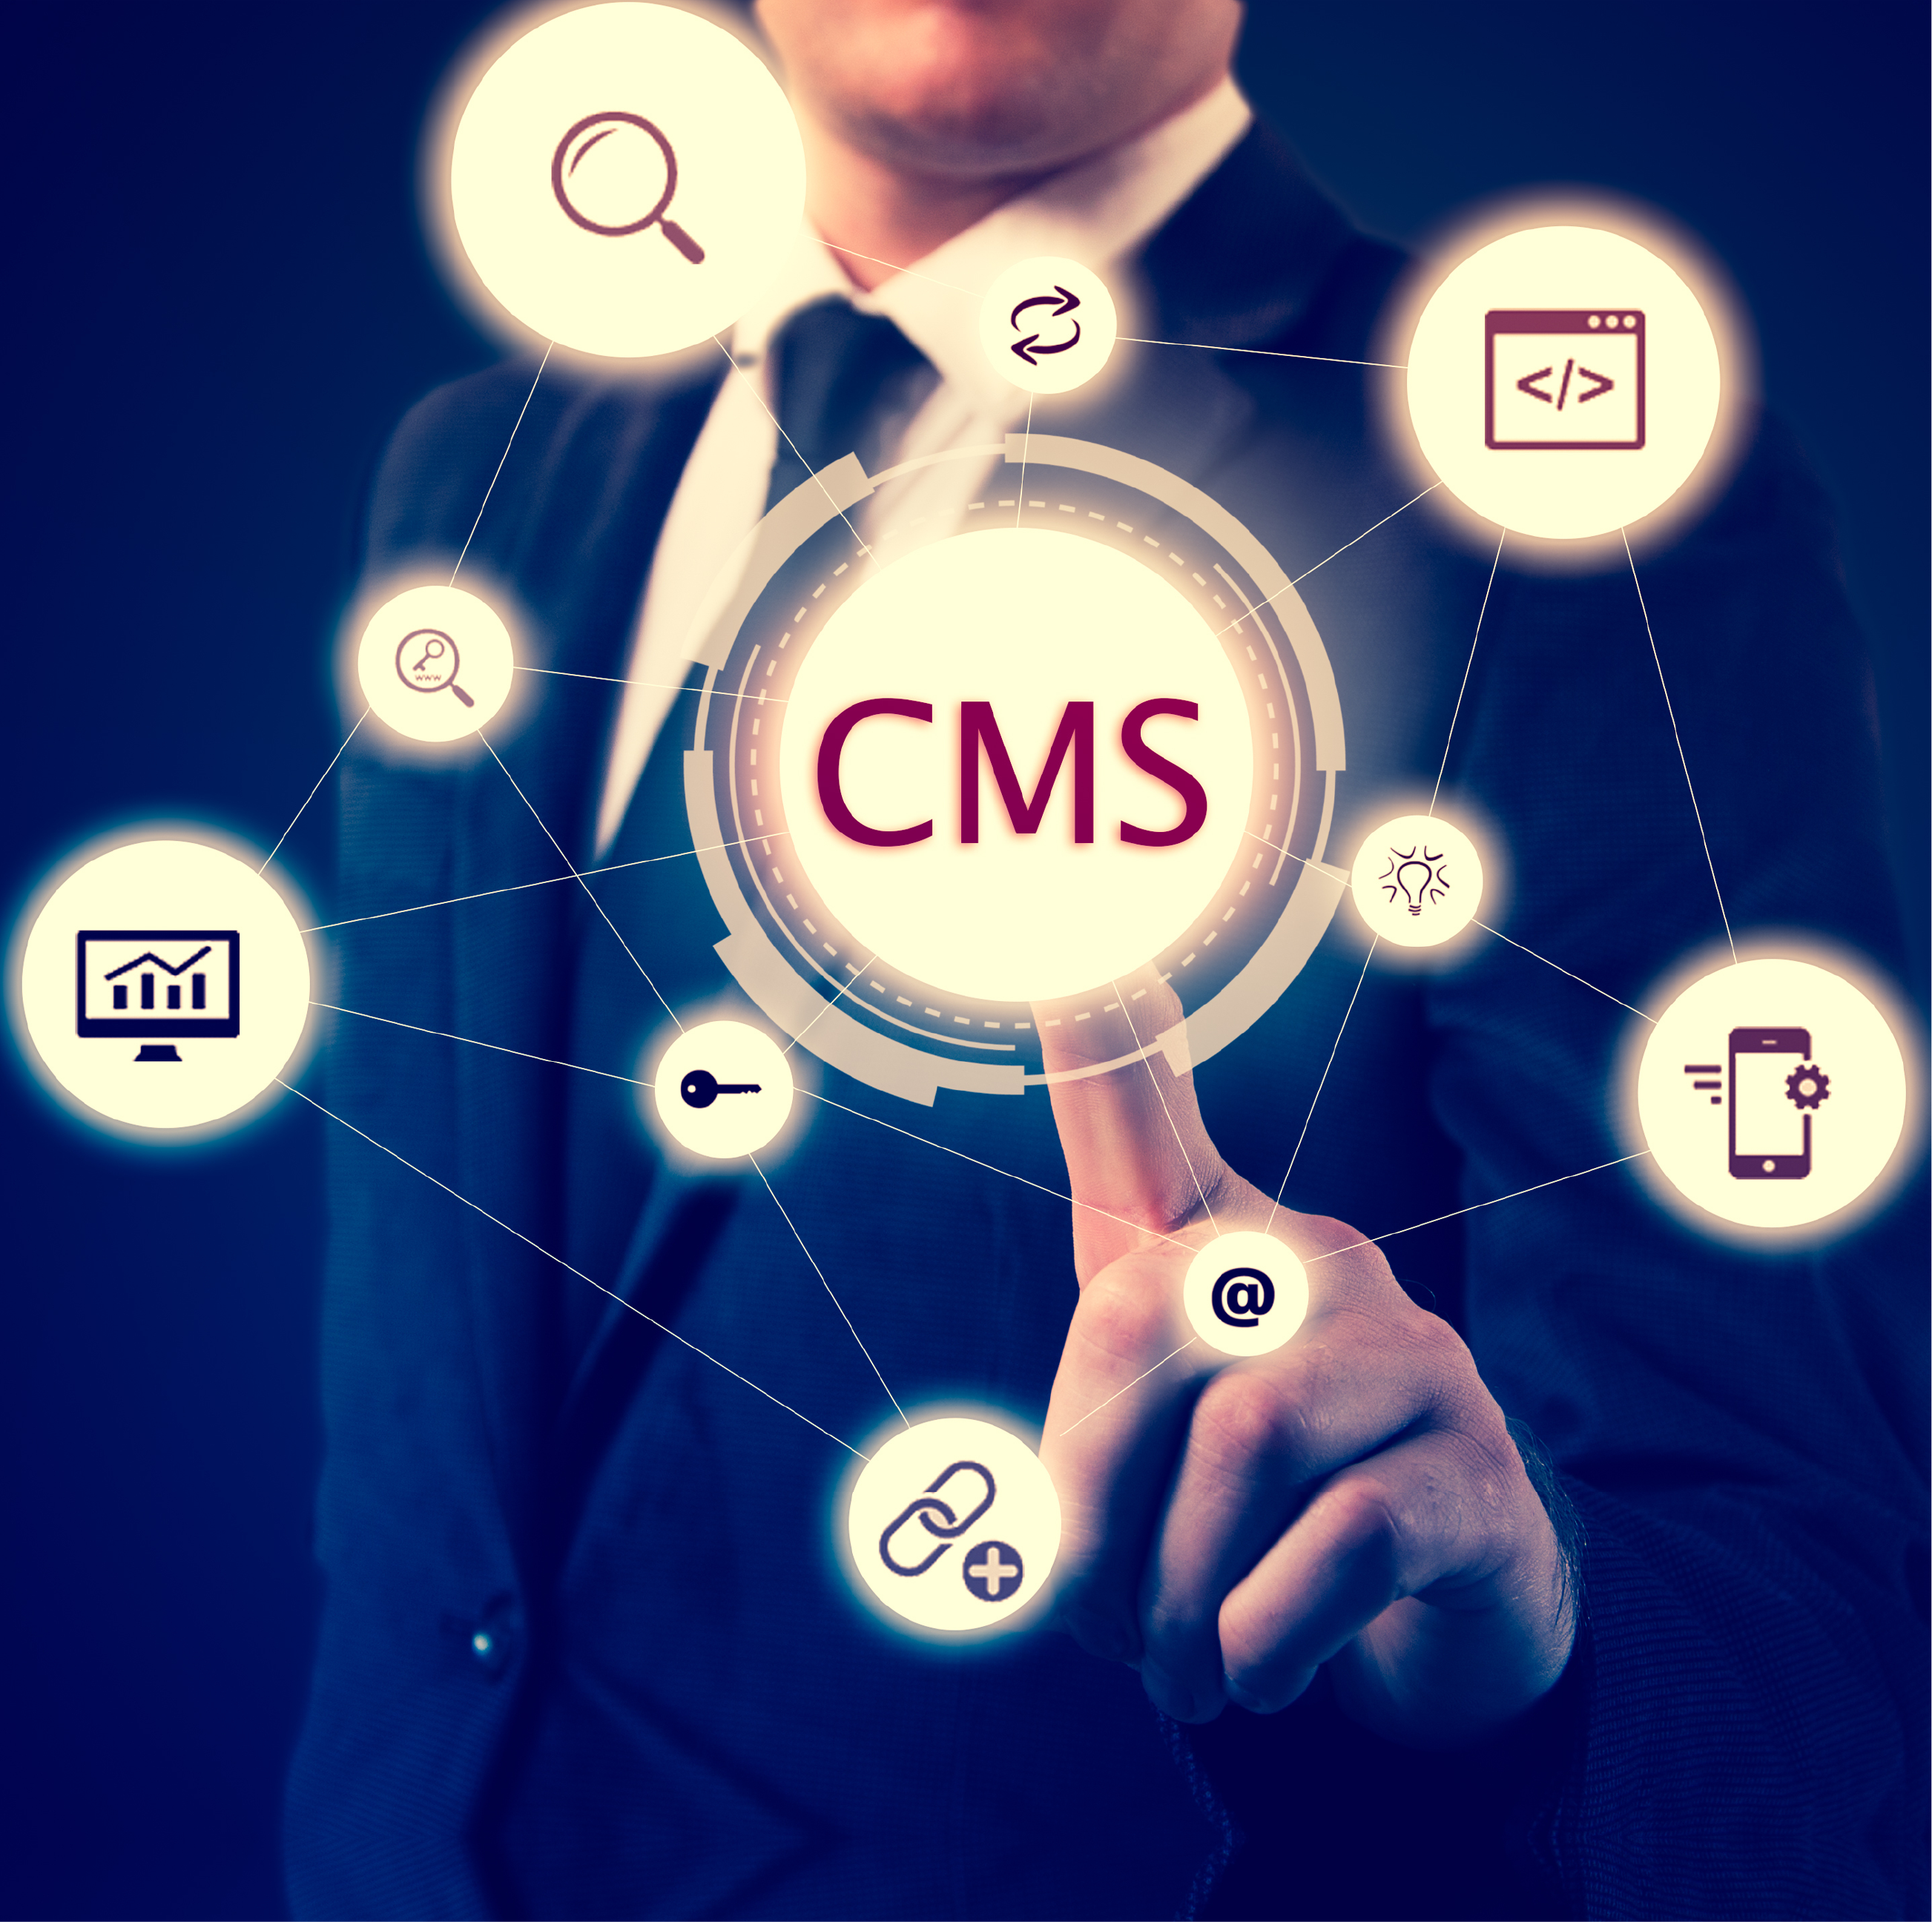 A man is touching CMS in the middle and it is connected to many other futures.